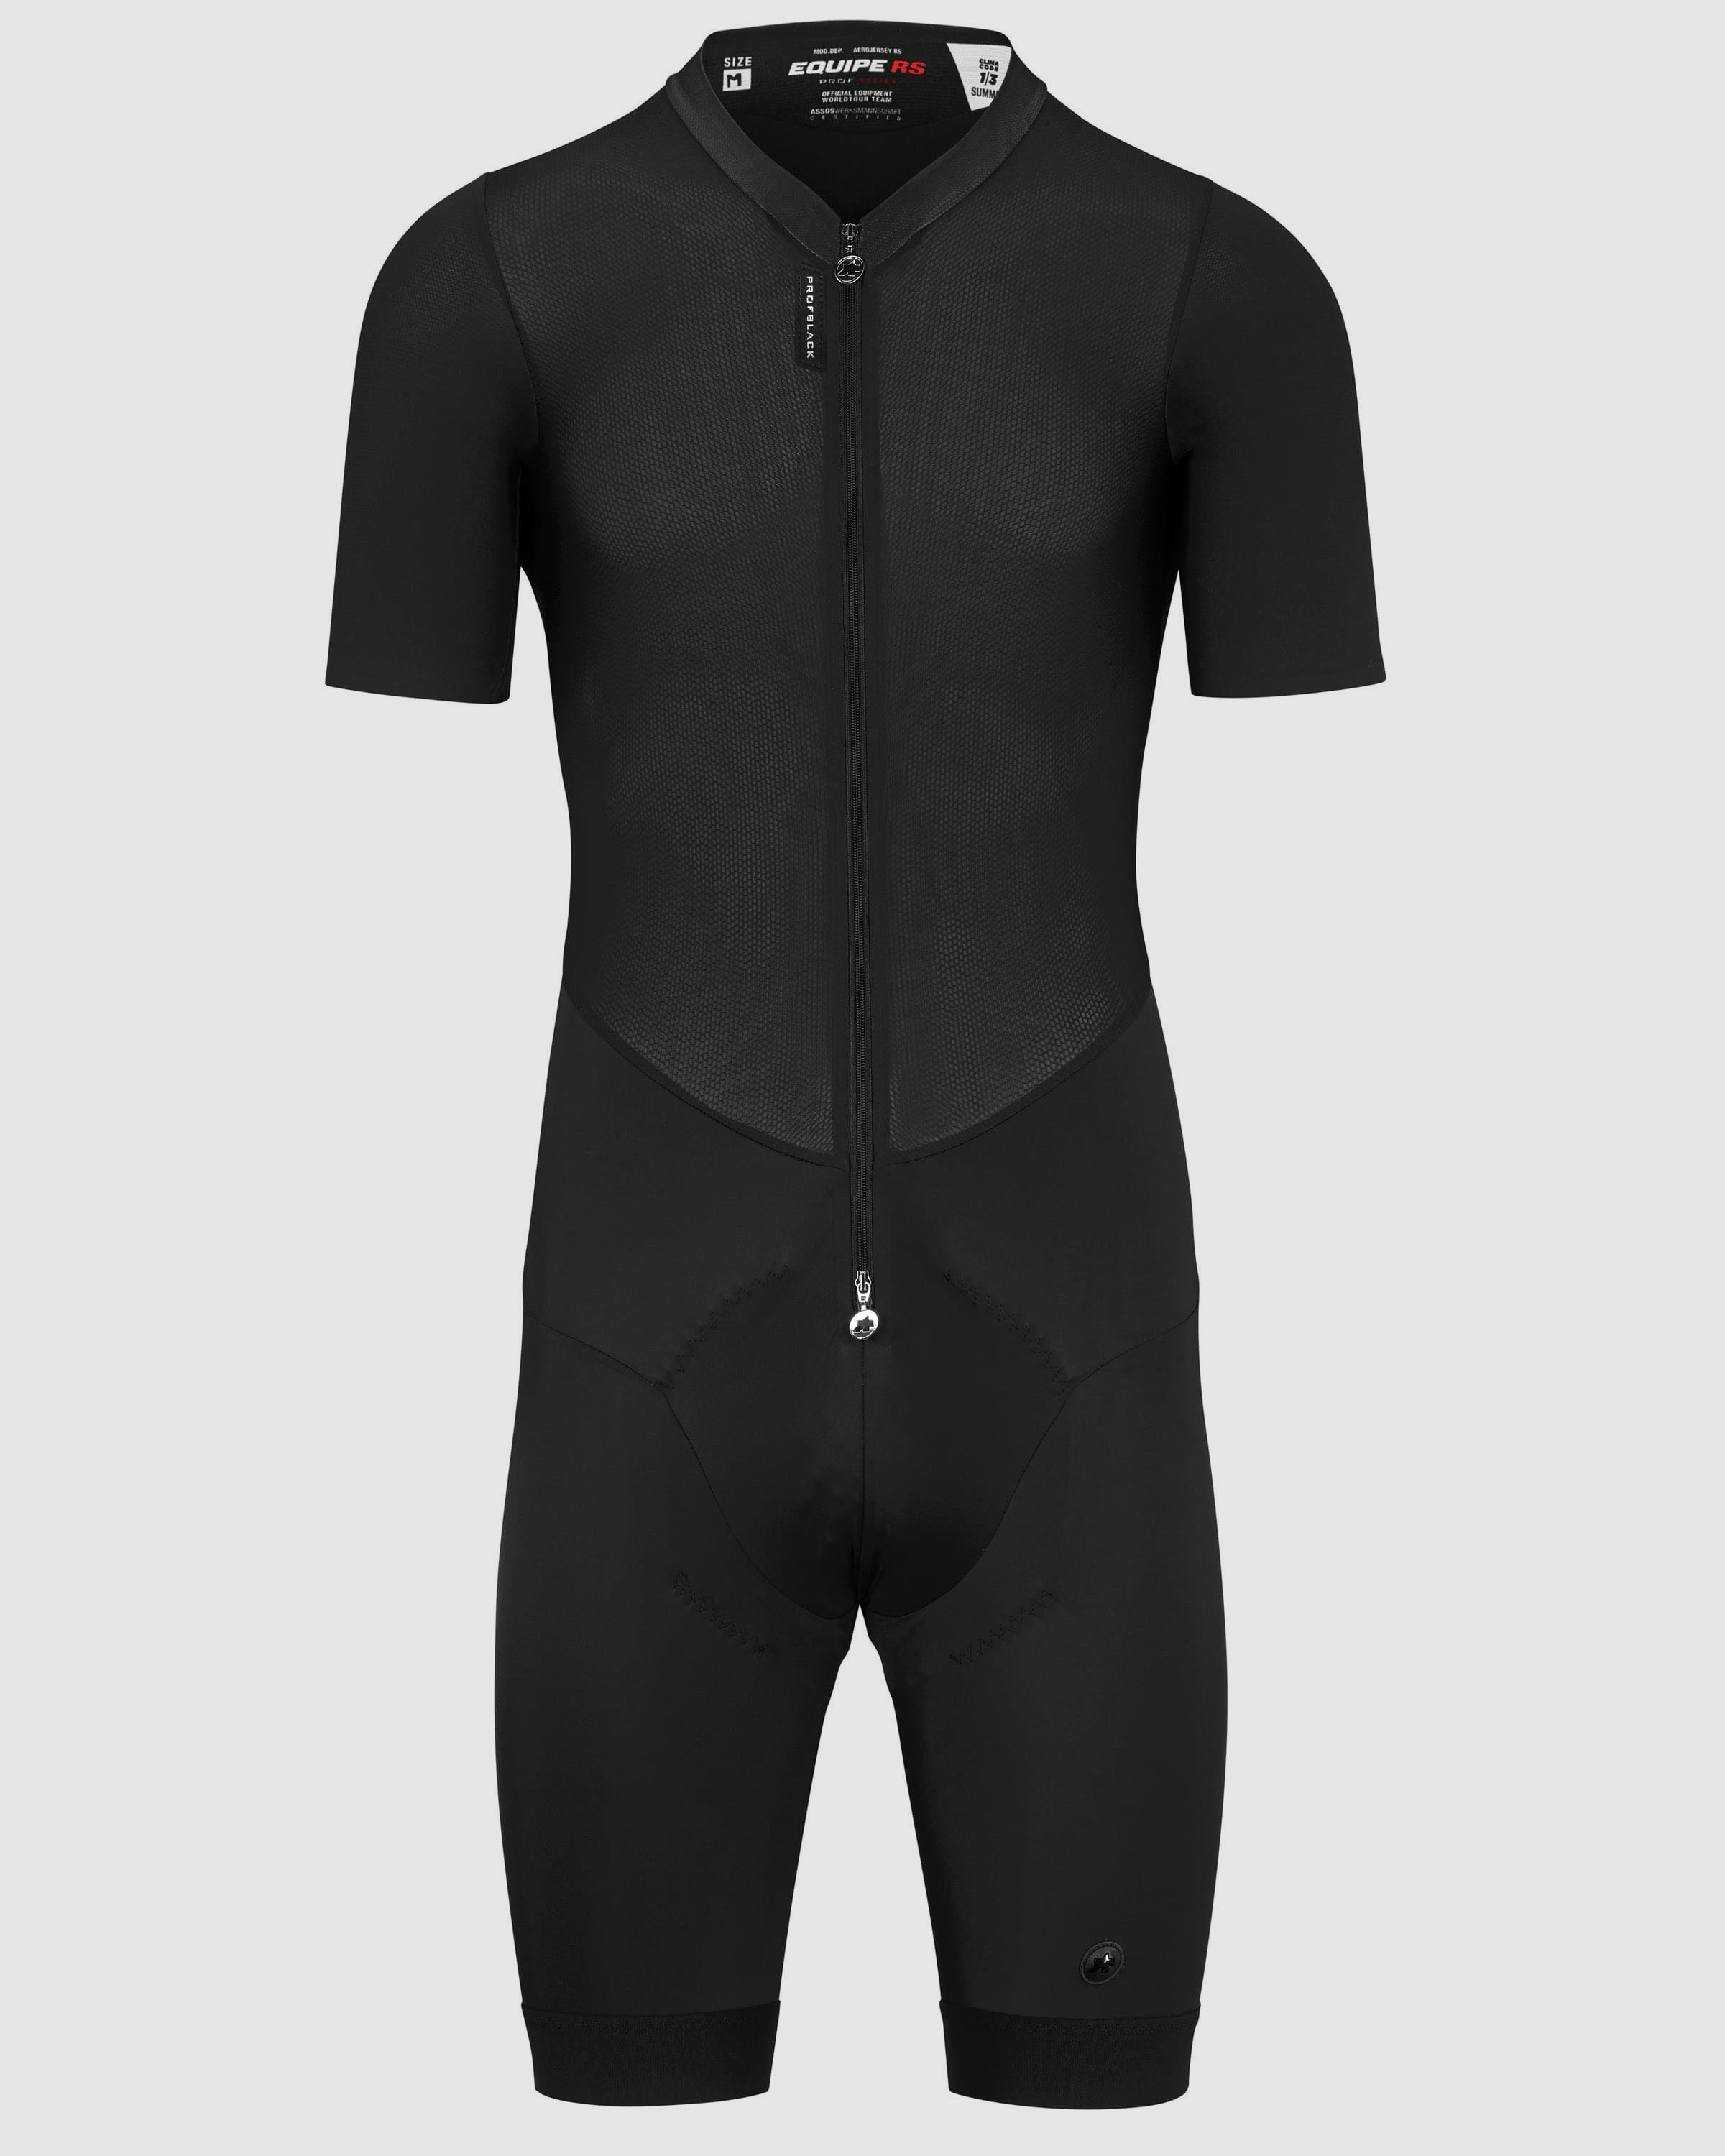 LEHOUDINI RS Aero Roadsuit s9 - ASSOS Of Switzerland - Official Outlet